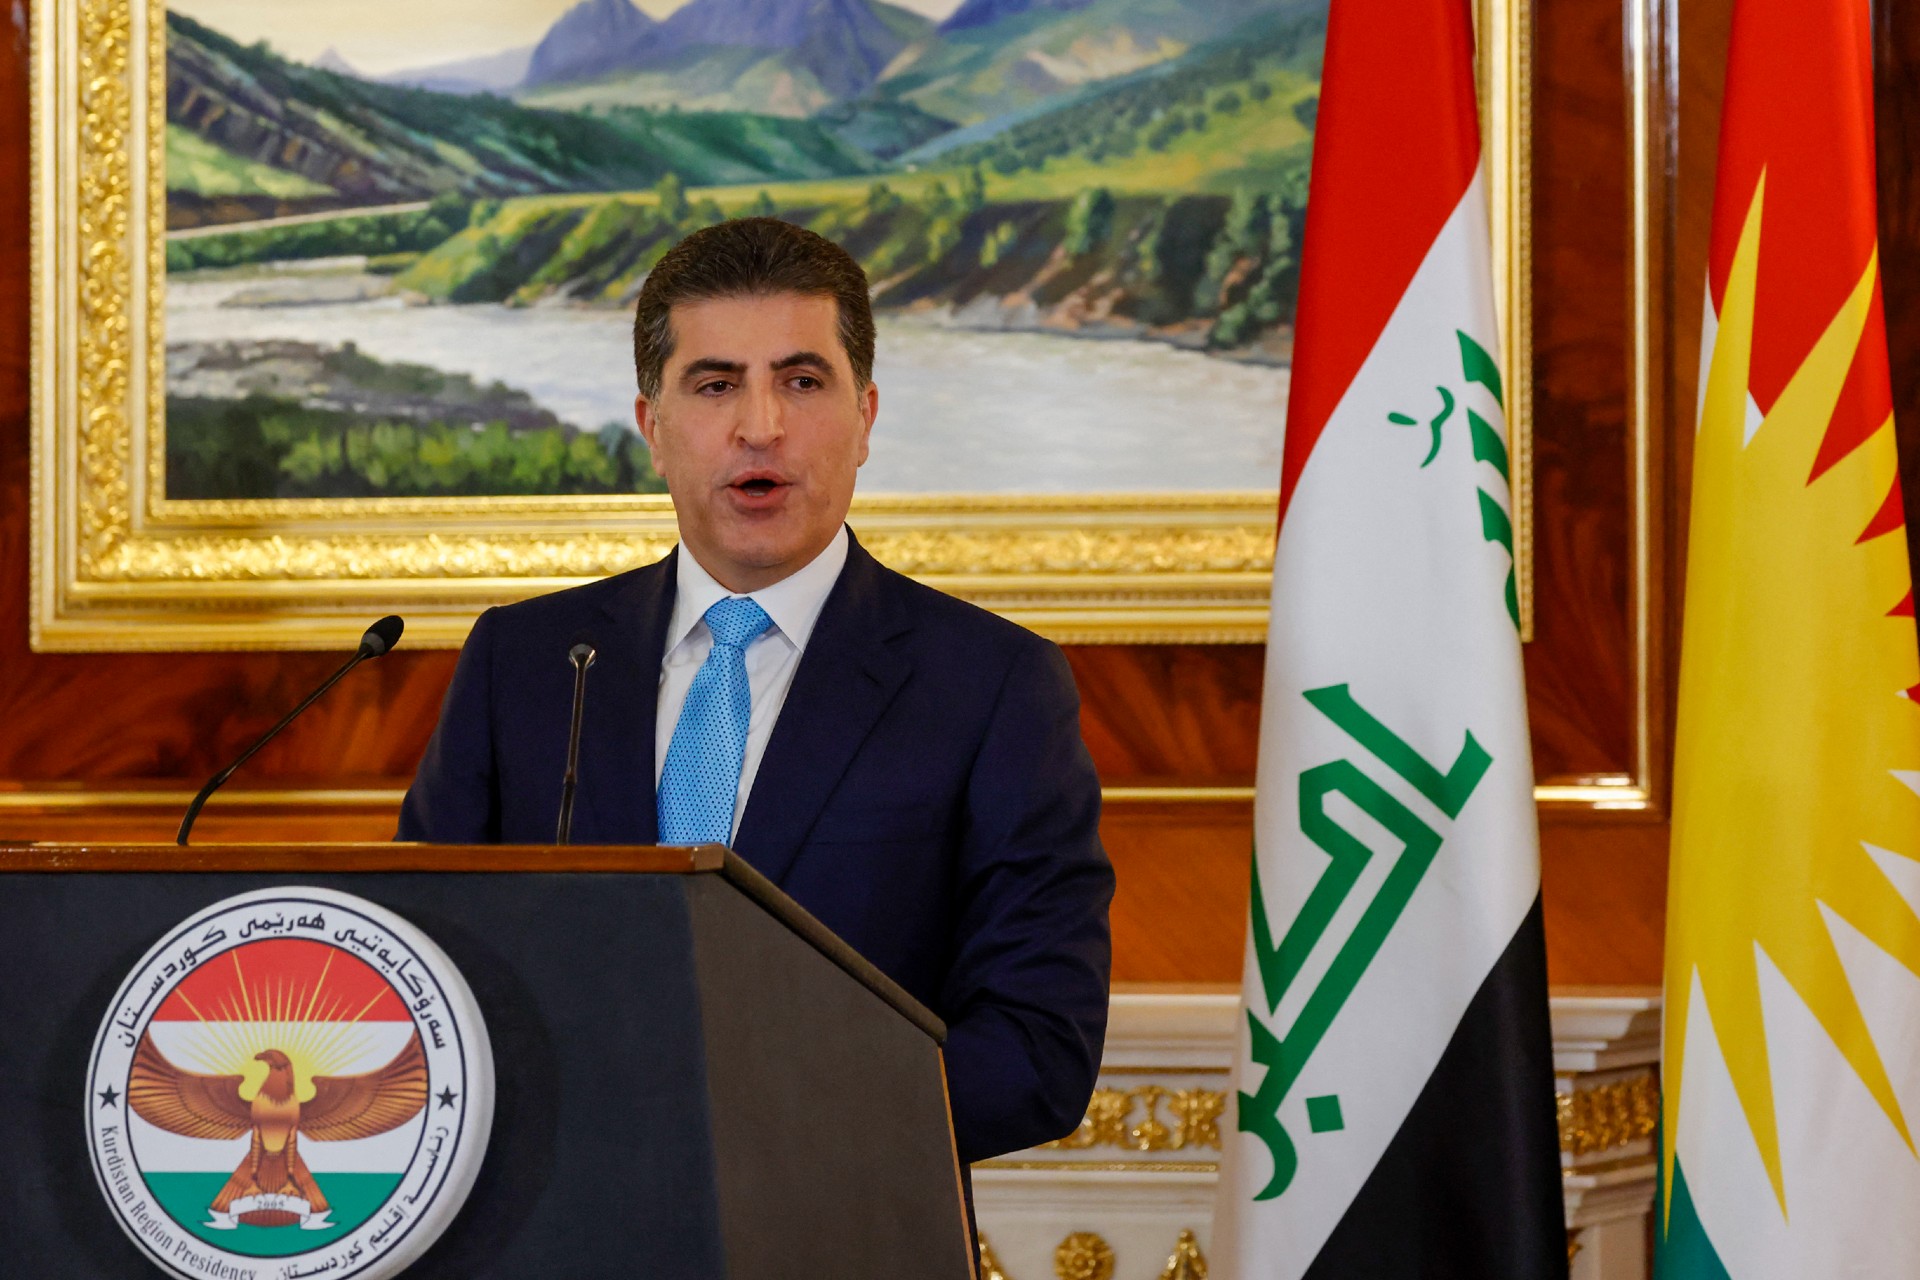 Nechirvan Barzani, president of Iraq's autonomous Kurdistan Region, gives a press conference at the presidential palace in Erbil (AFP)